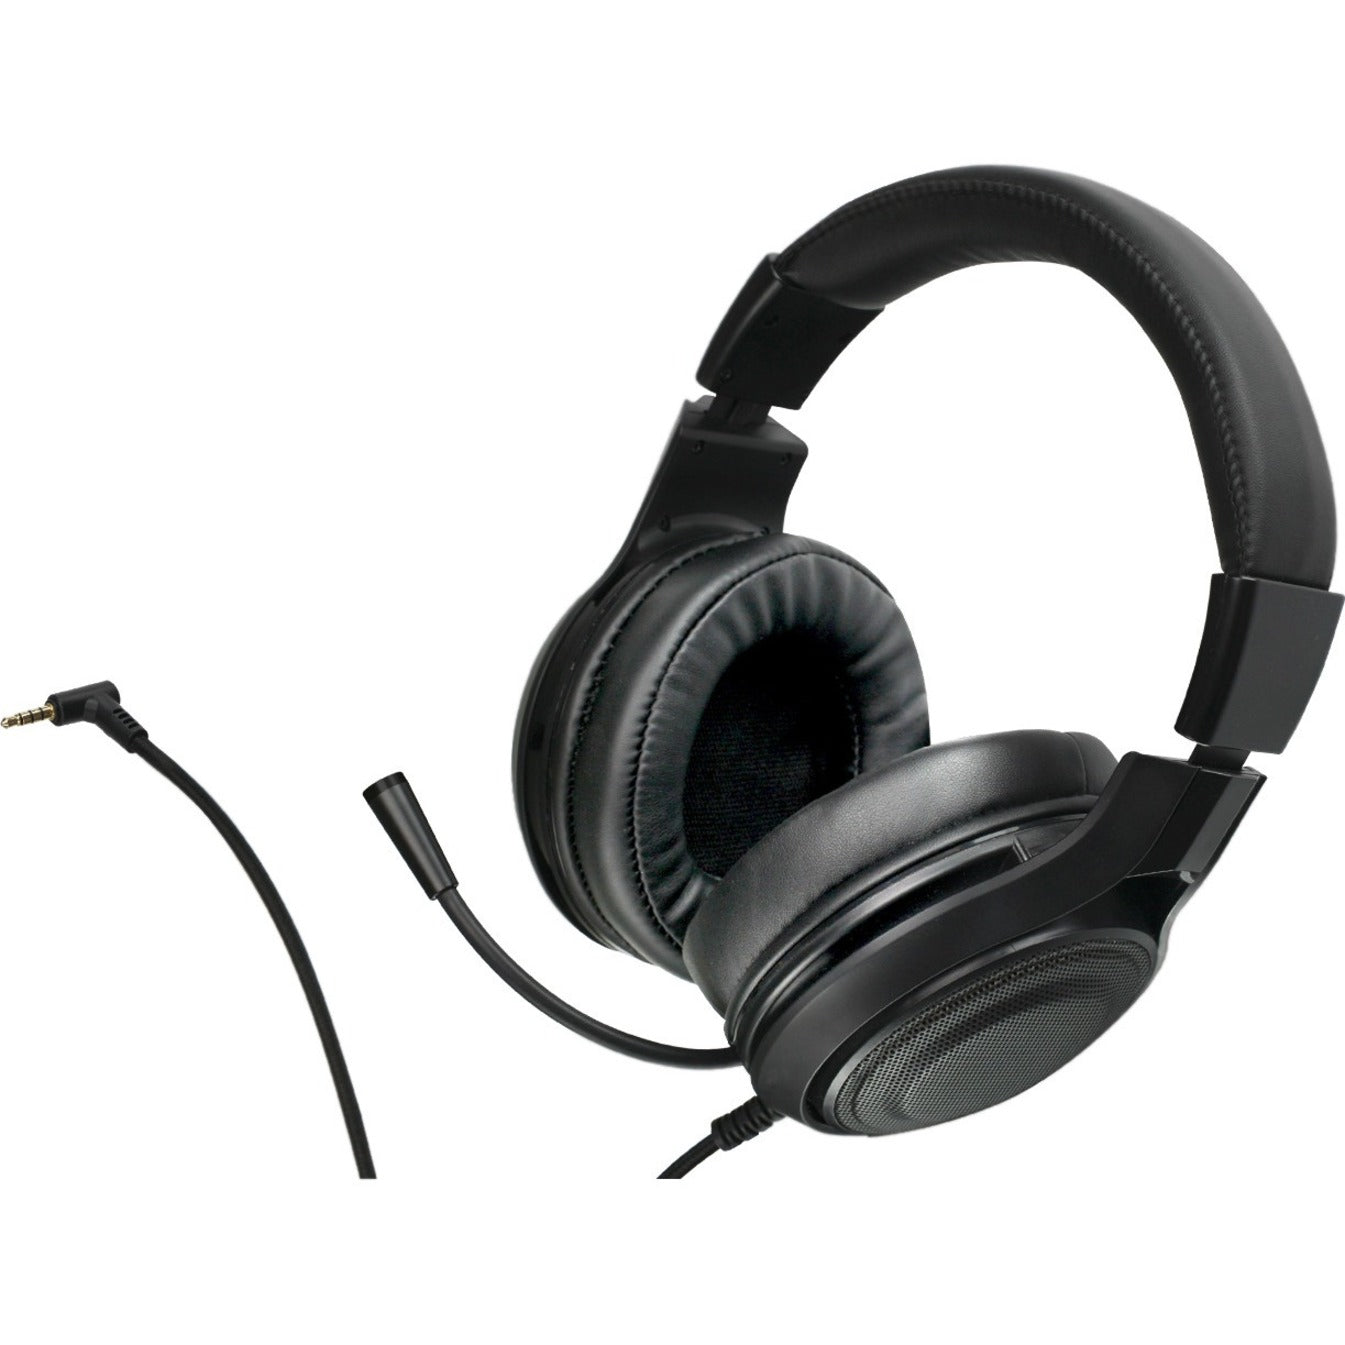 IOGEAR GHG601 Kaliber Gaming NUKLEUS Universal Gaming Headset, Over-the-head, Stereo Sound, Boom Microphone